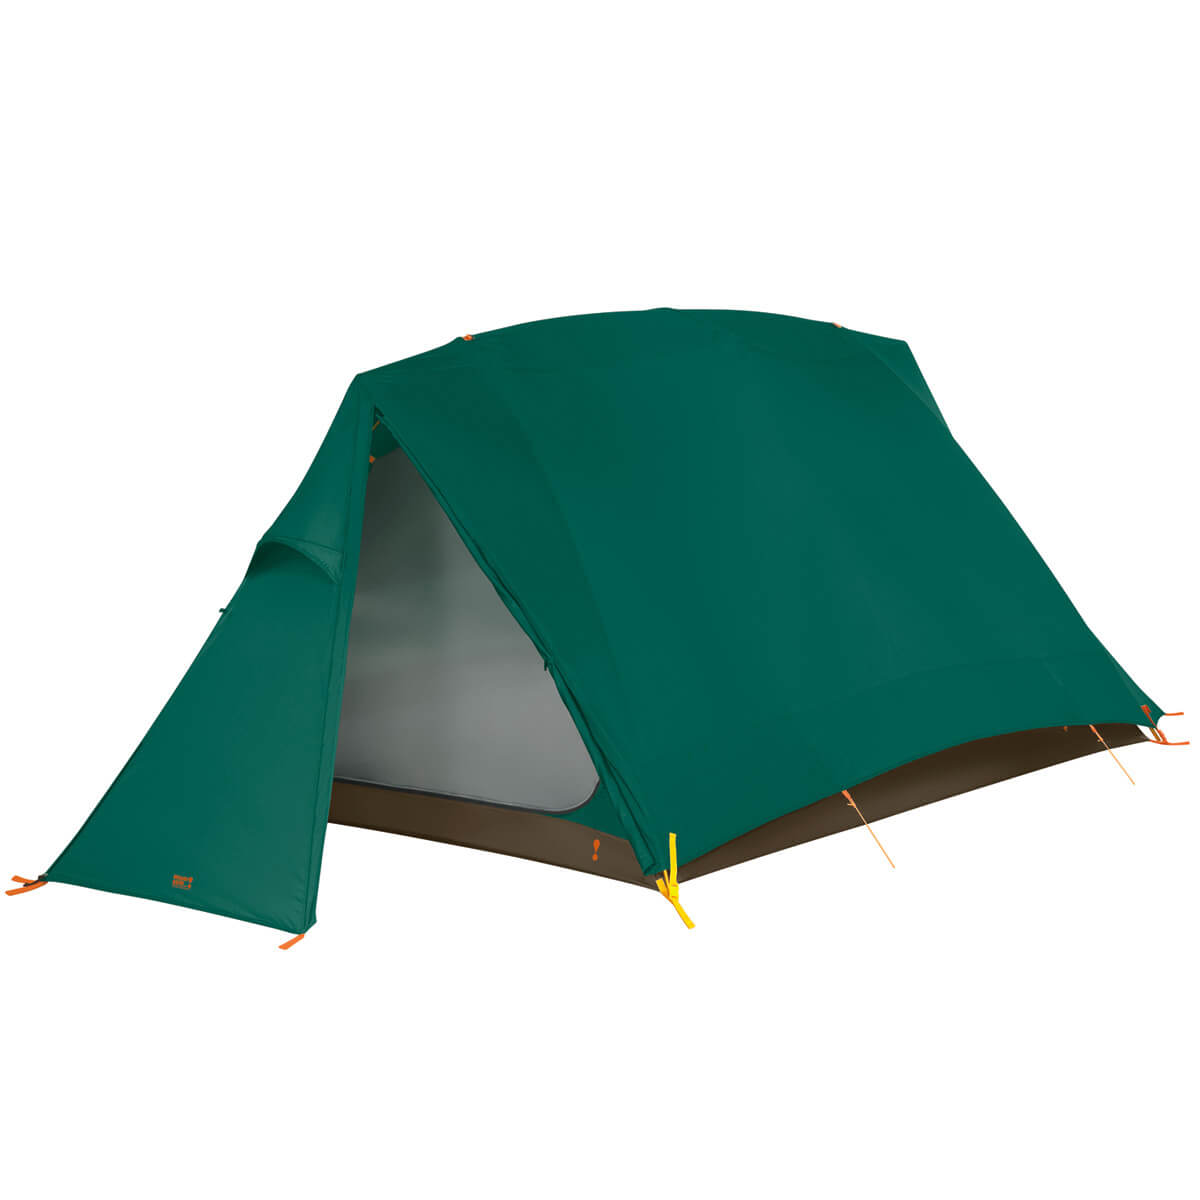 Eureka Timberline SQ 2XT 3 season two person backpacking tent with rain fly